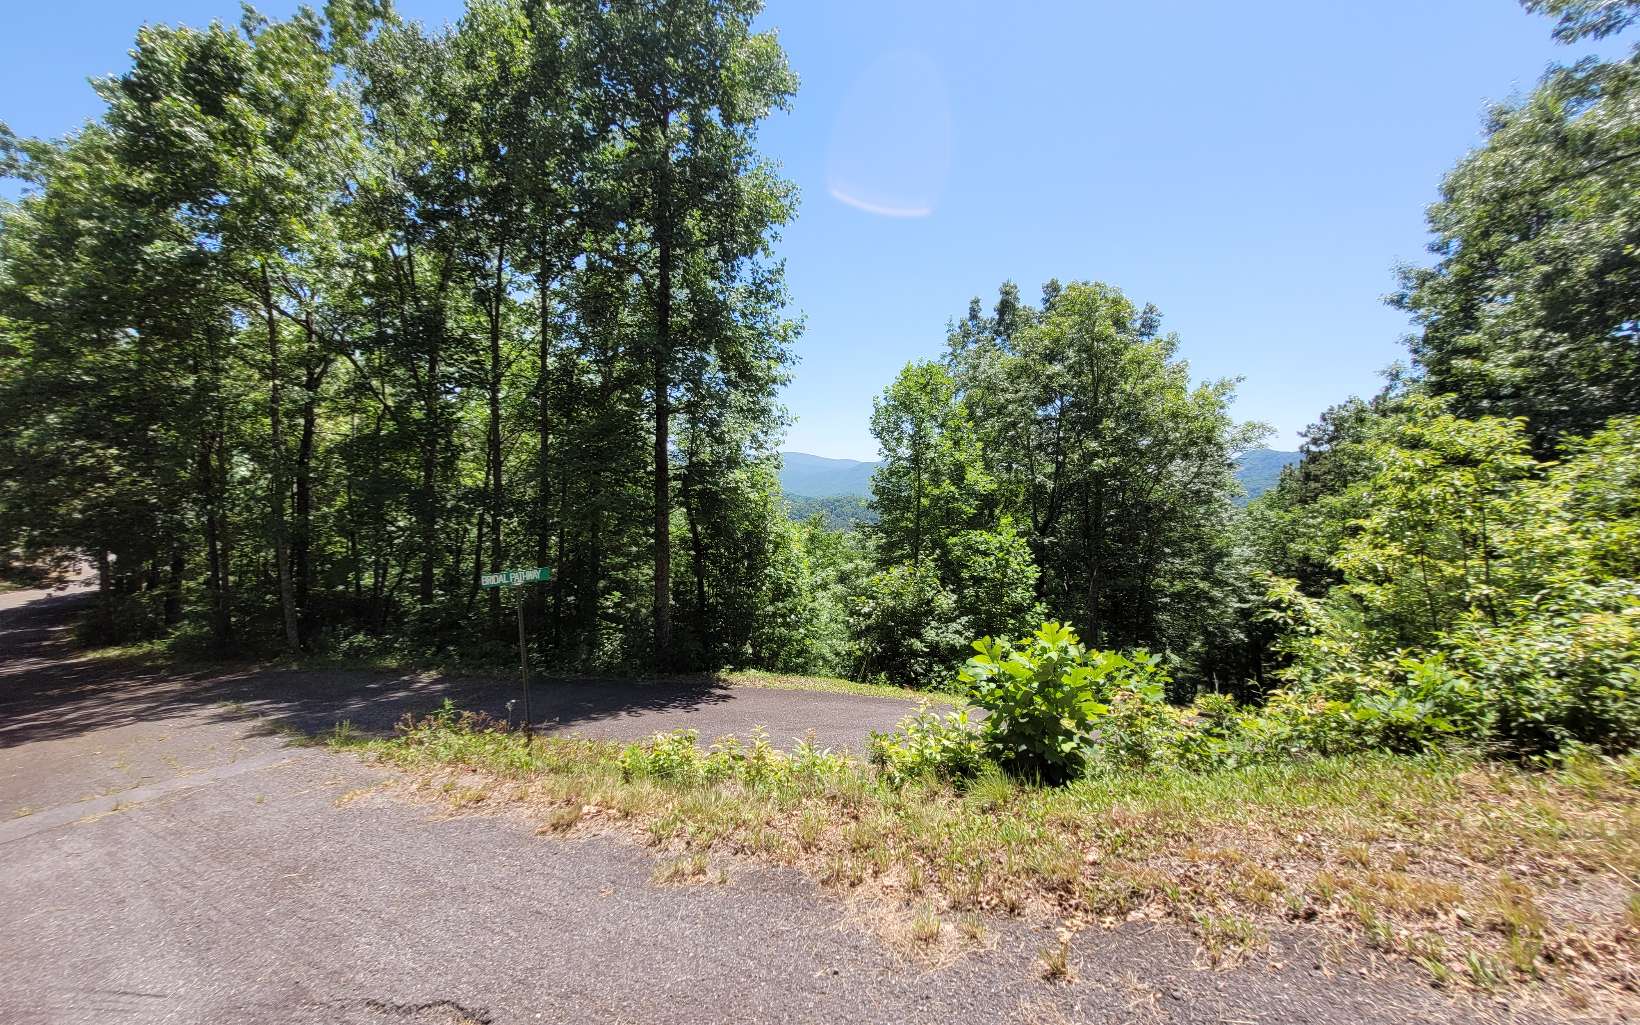 Magnificent Mountain Community! This hidden gem has much to offer including National Forest hiking trails (that connect to the Appalachian Trail!) and a community pond and stream with pavilion. This lot has tremendous year-round mountain views and sits near the top of the mountain. Priced to Sell!